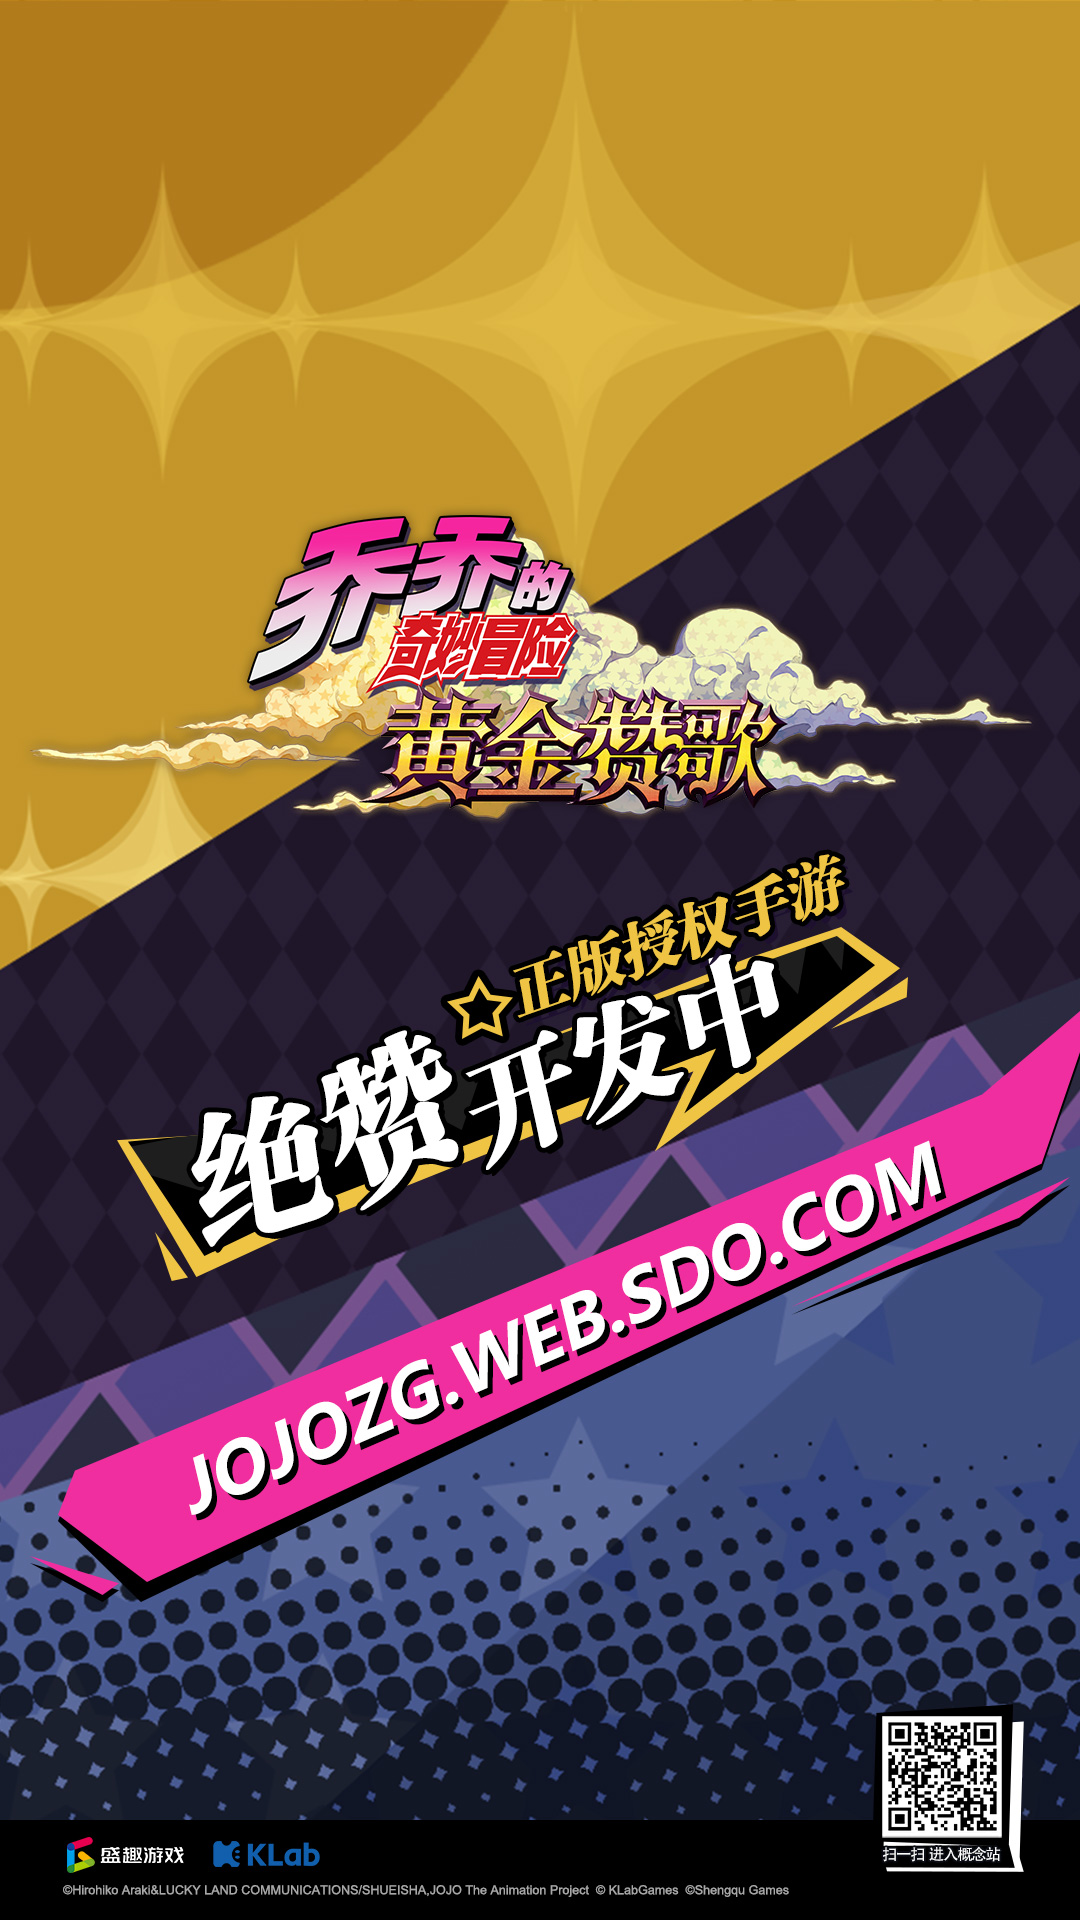 KLab Acquires Worldwide Distribution Rights for JoJo Mobile Game